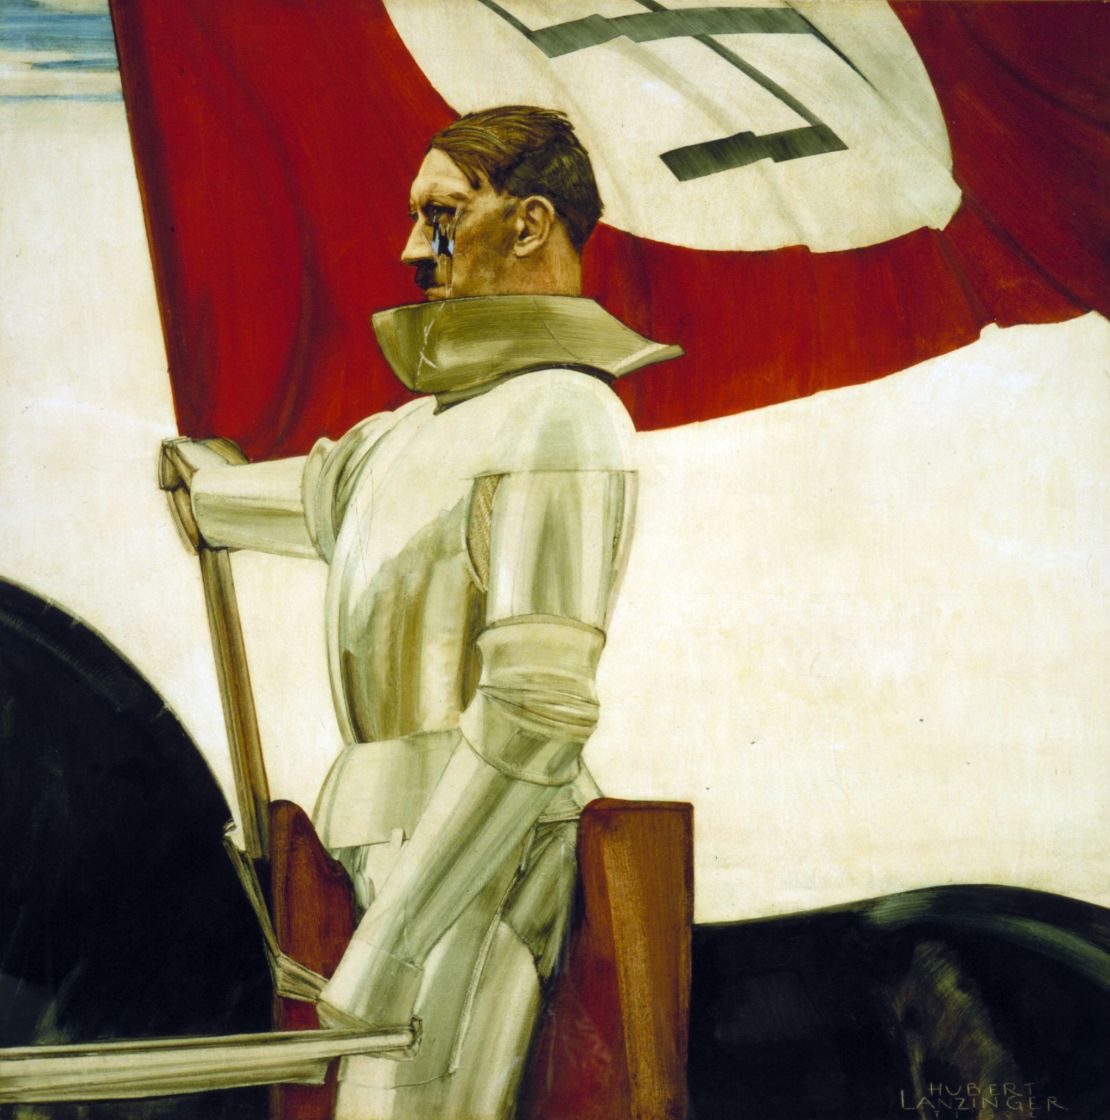 "The Standard Bearer" (1934--6) by Hubert Lanzinger. This portrayal of Hitler as a medieval knight reinforced the image of the dictator as strong and victorious.
